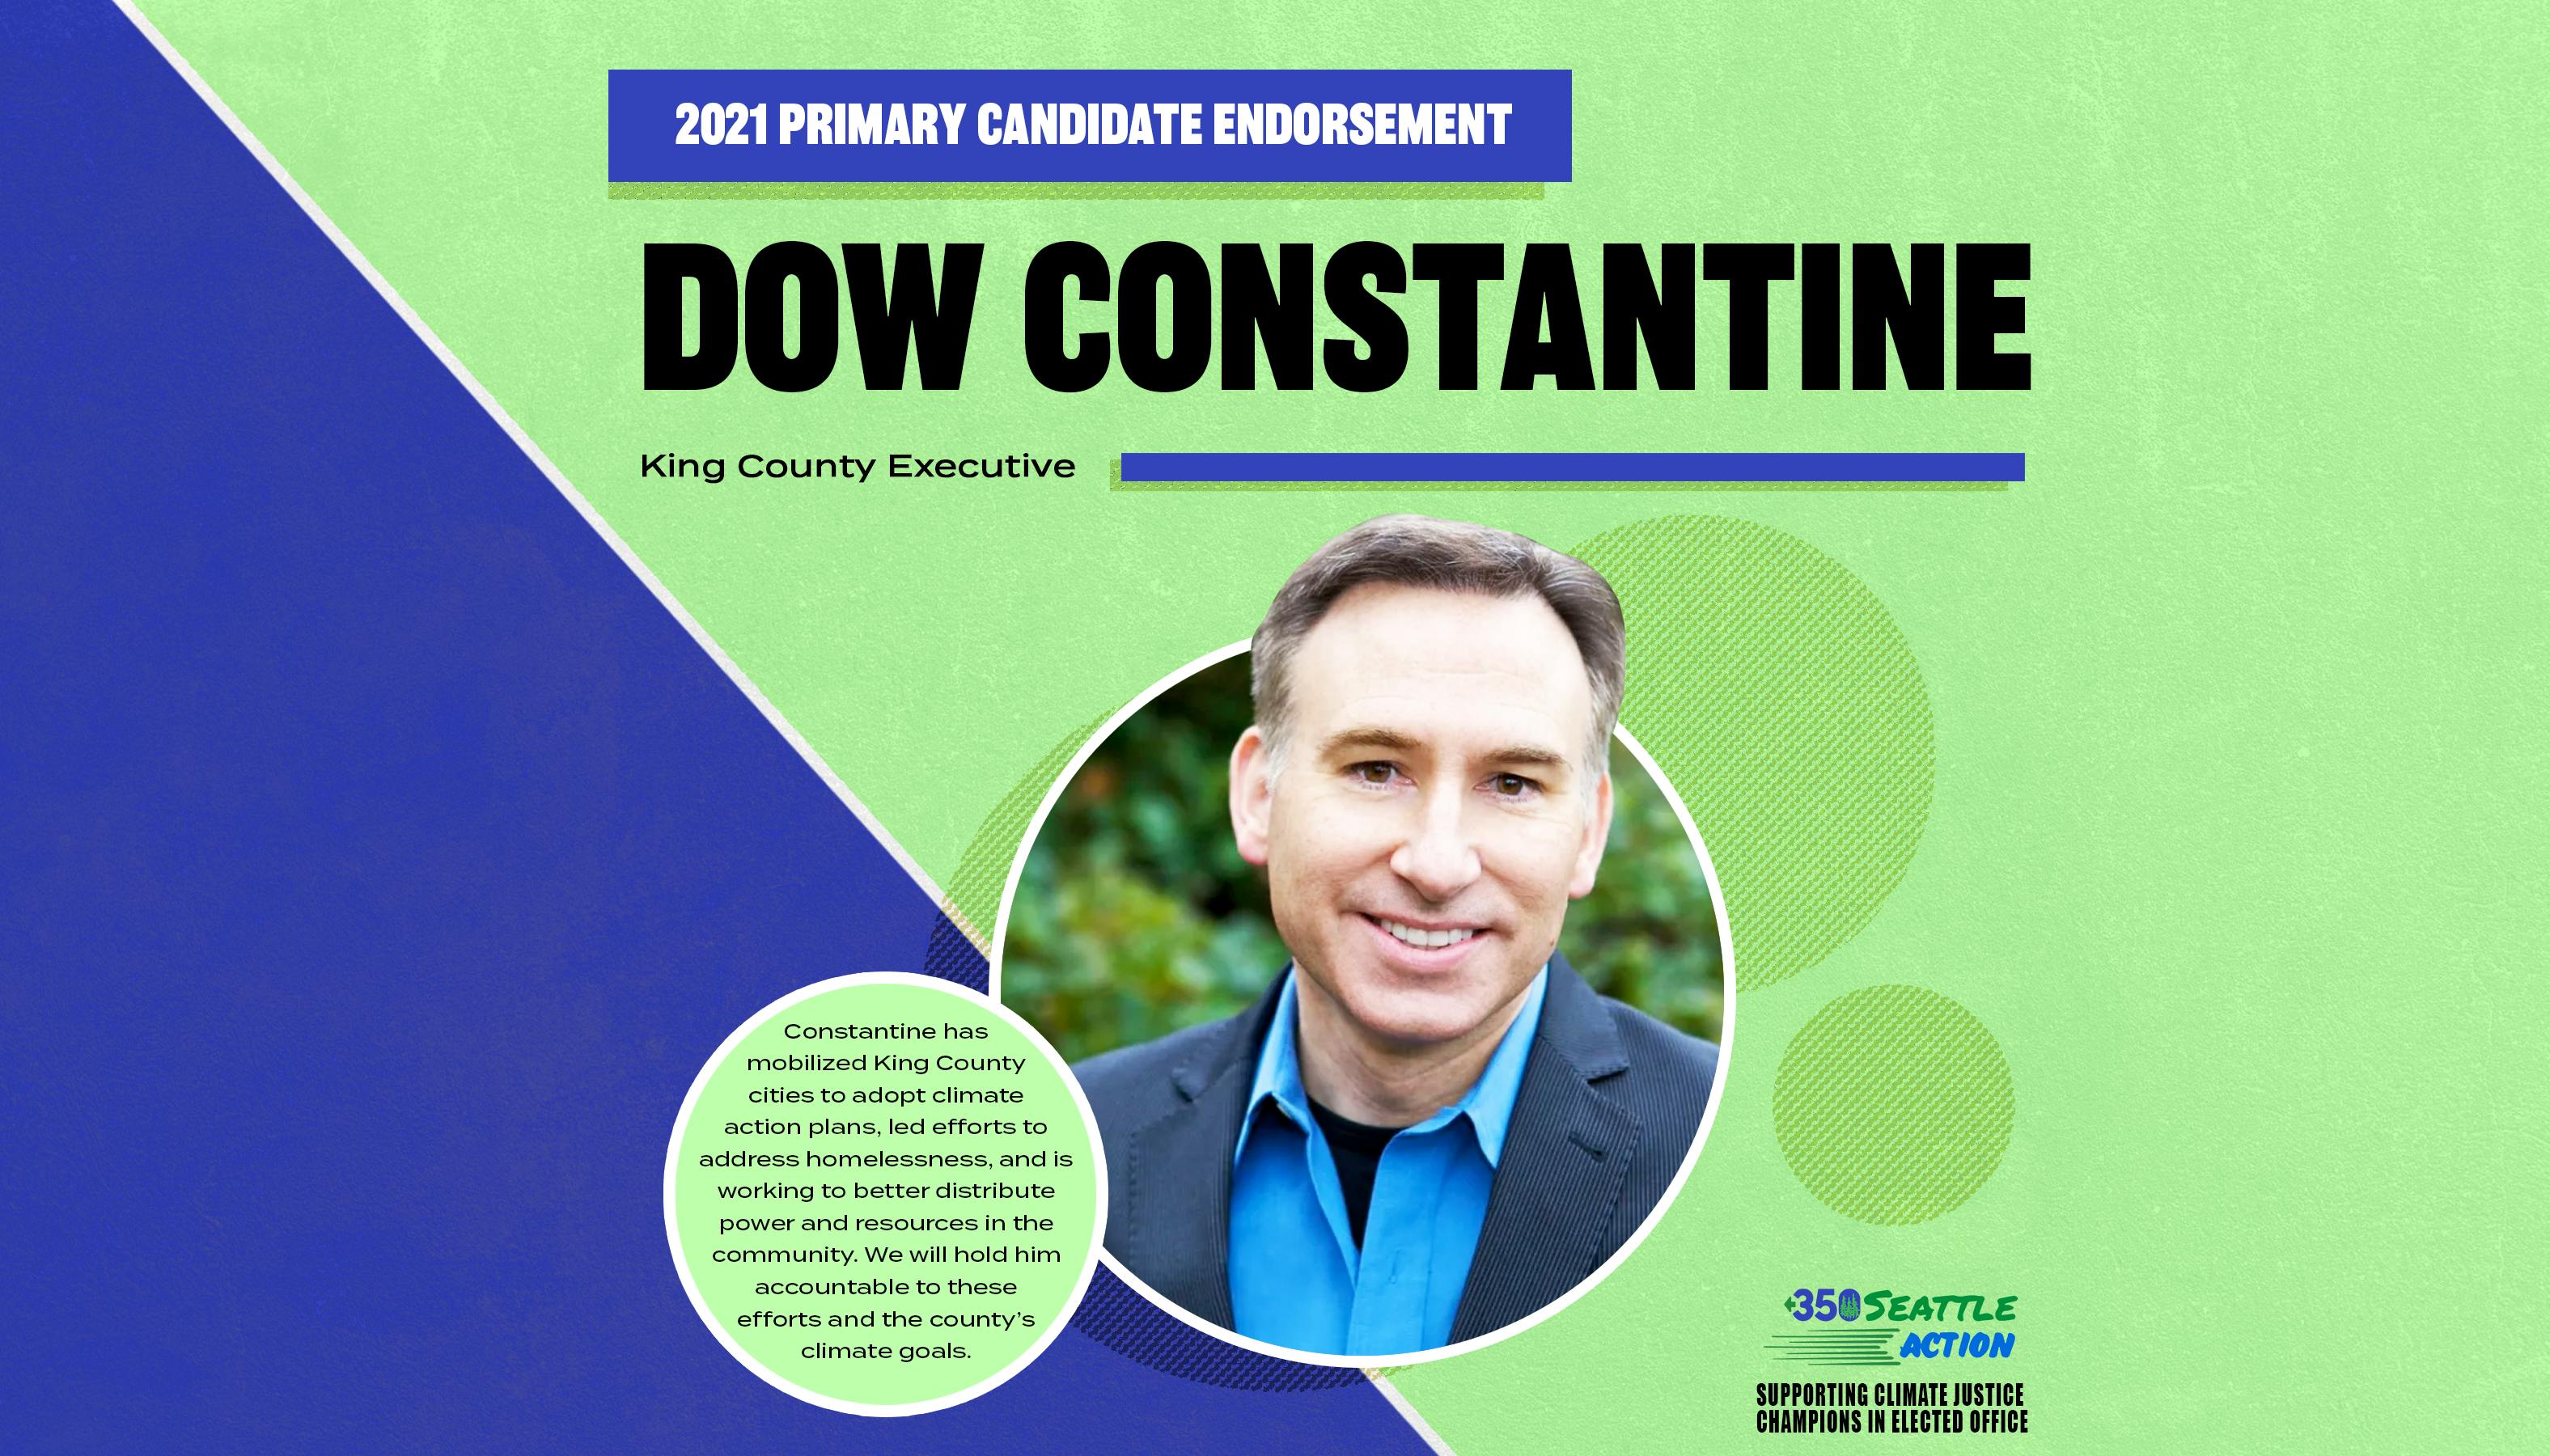 Dow Constantine Twitter.png